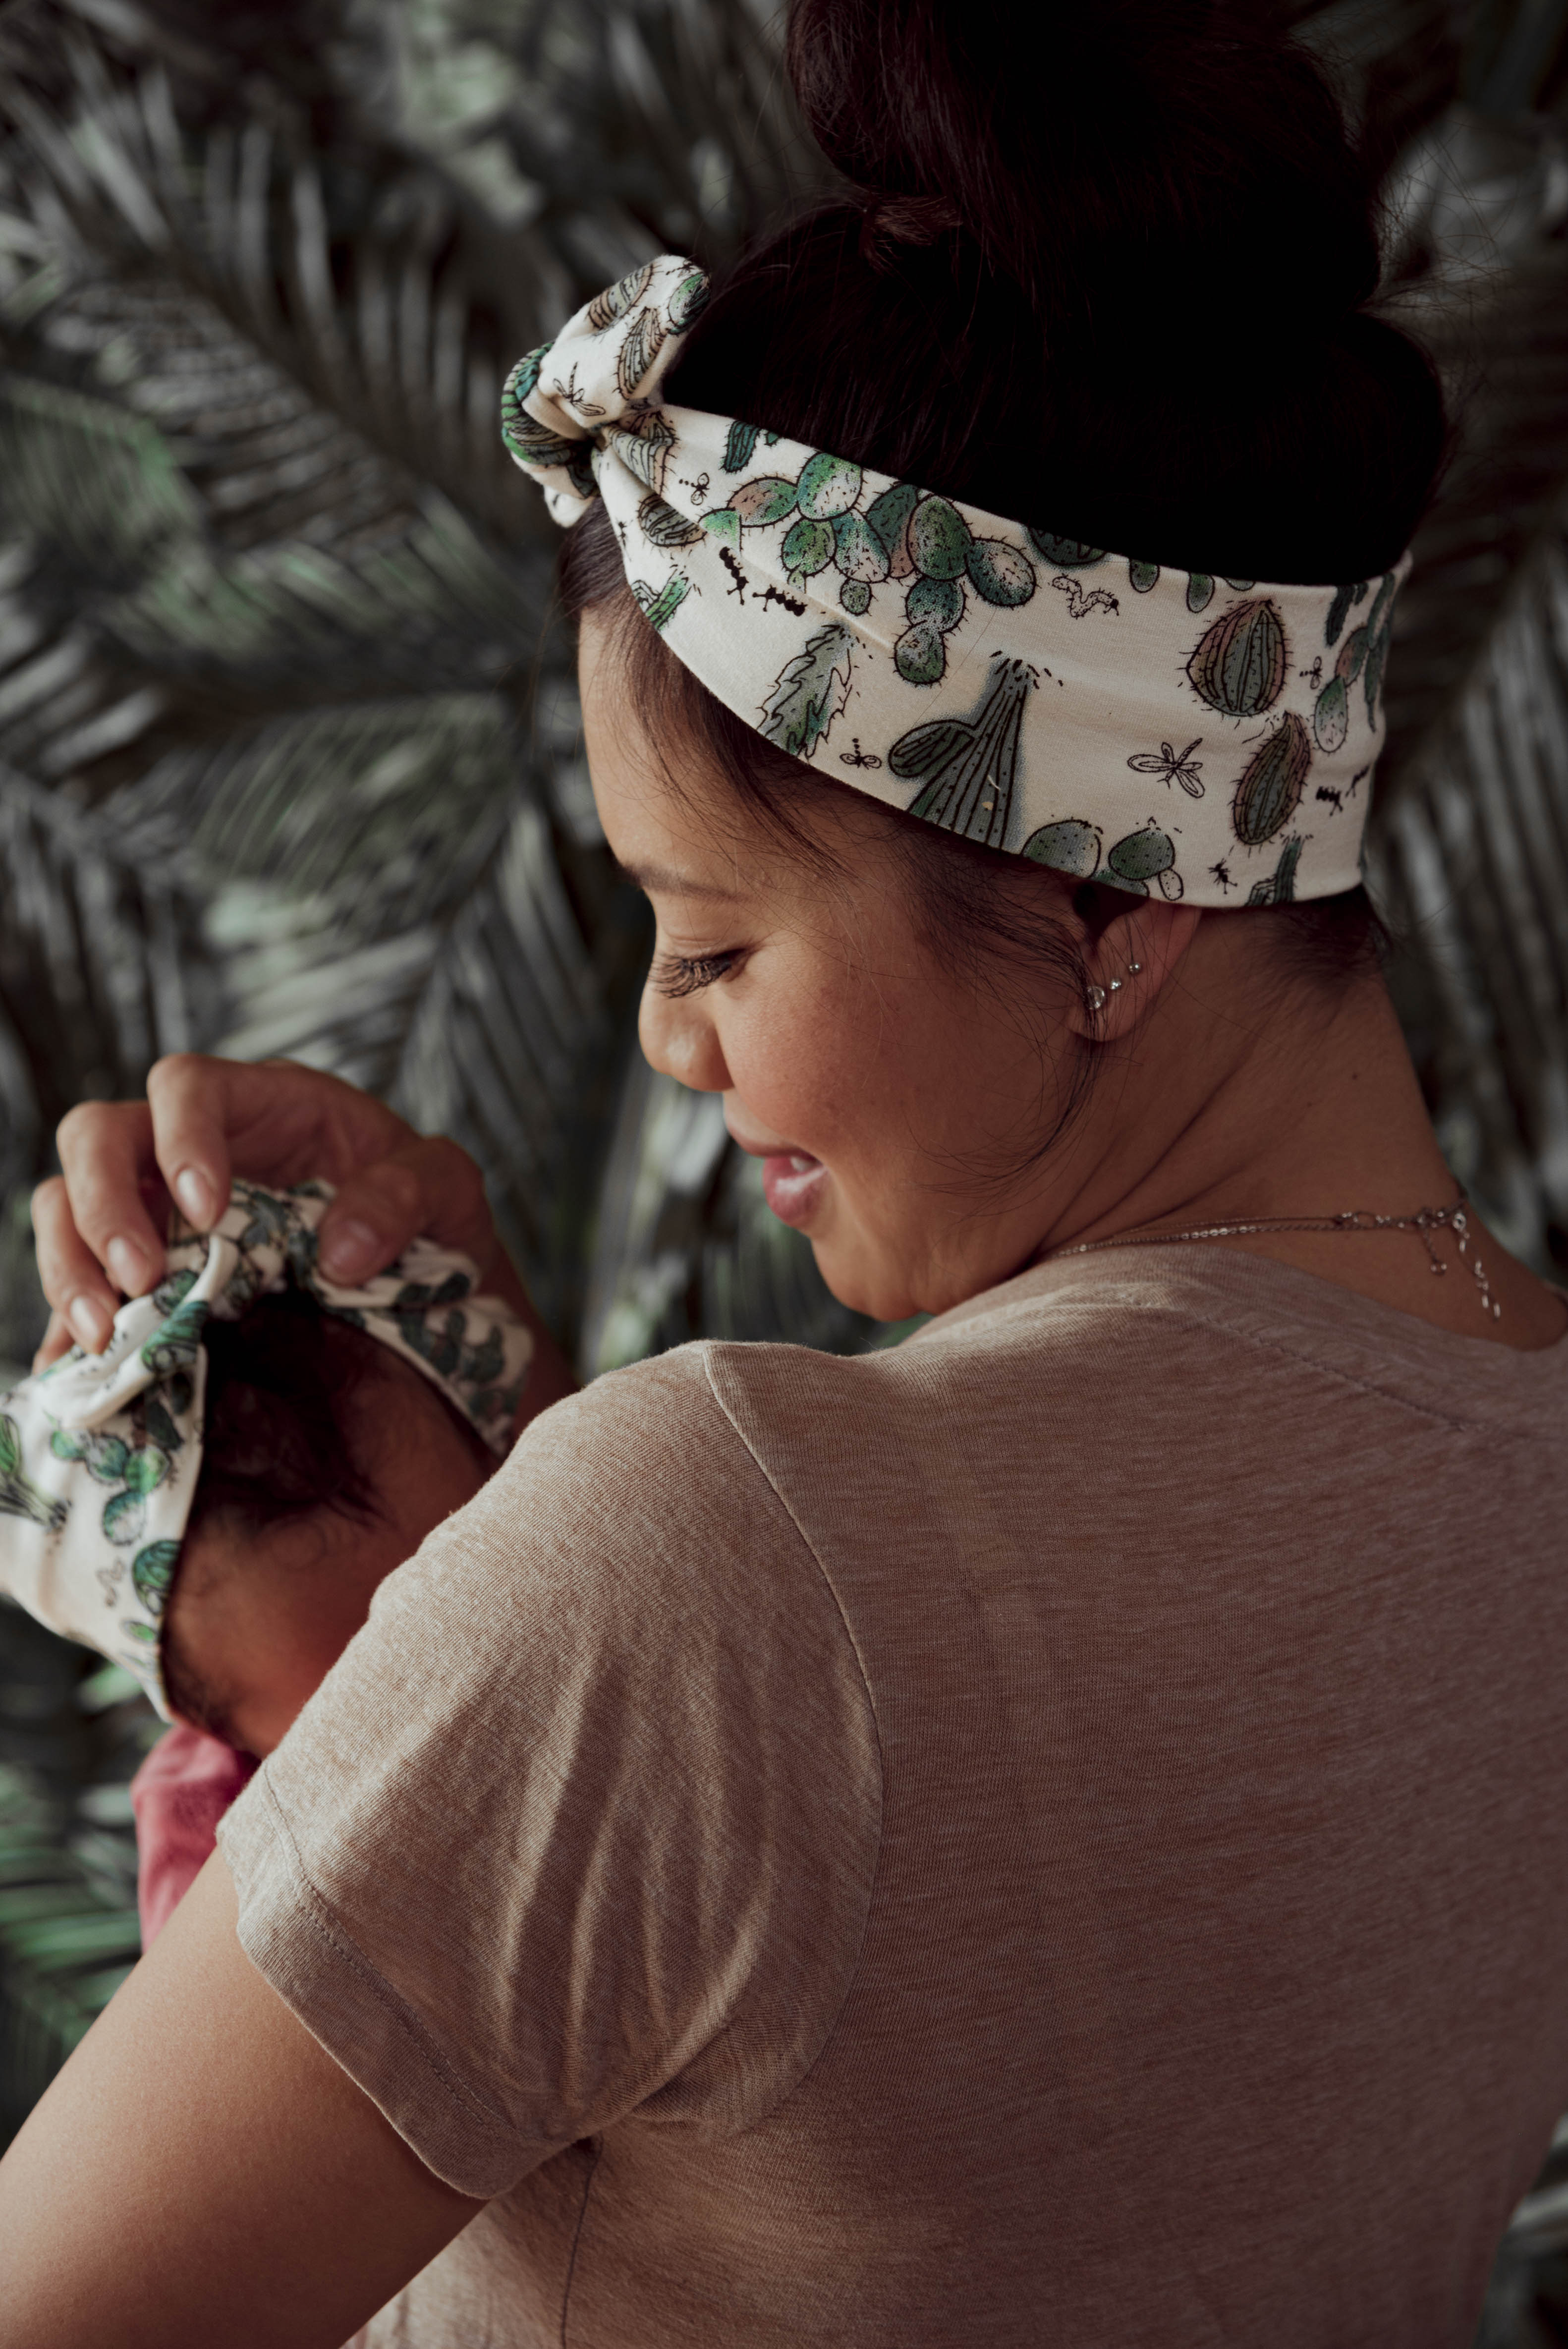 Spineless Prickly Pear Cactus Headwrap - Organic